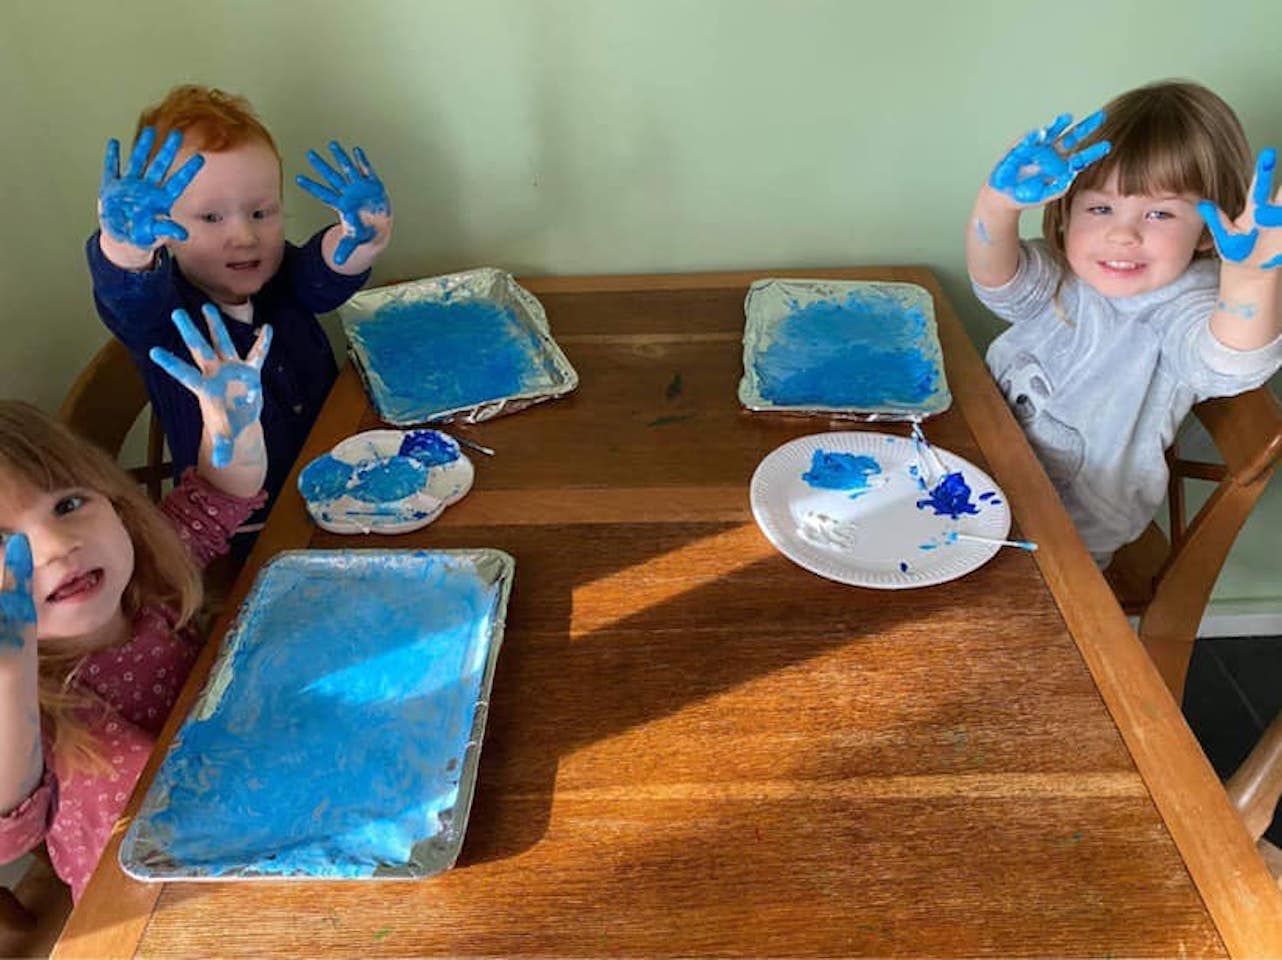 Messy play with blue paint